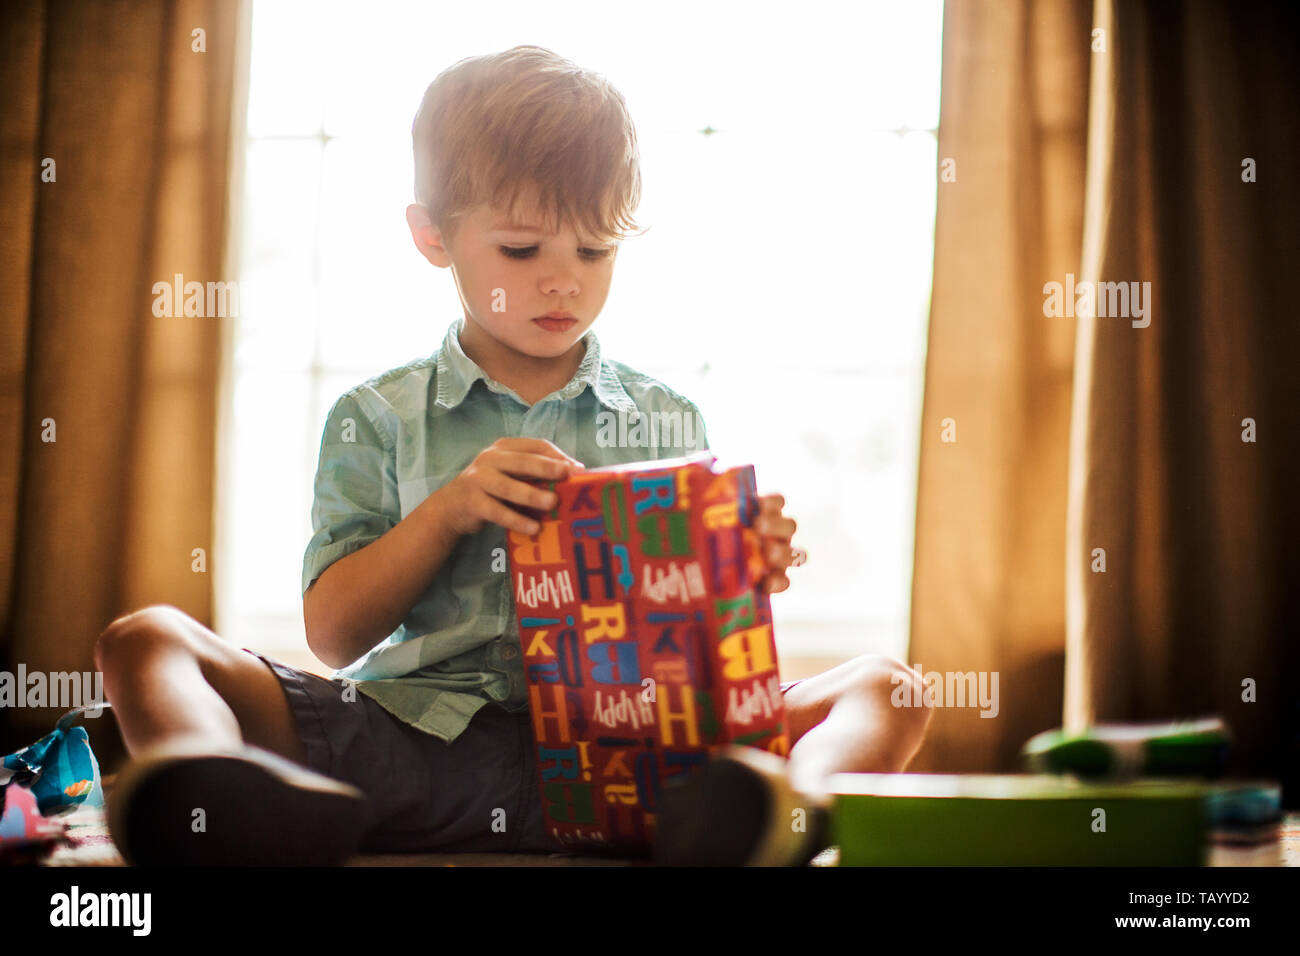 Young boy opening birthday presents Stock Photo  Alamy